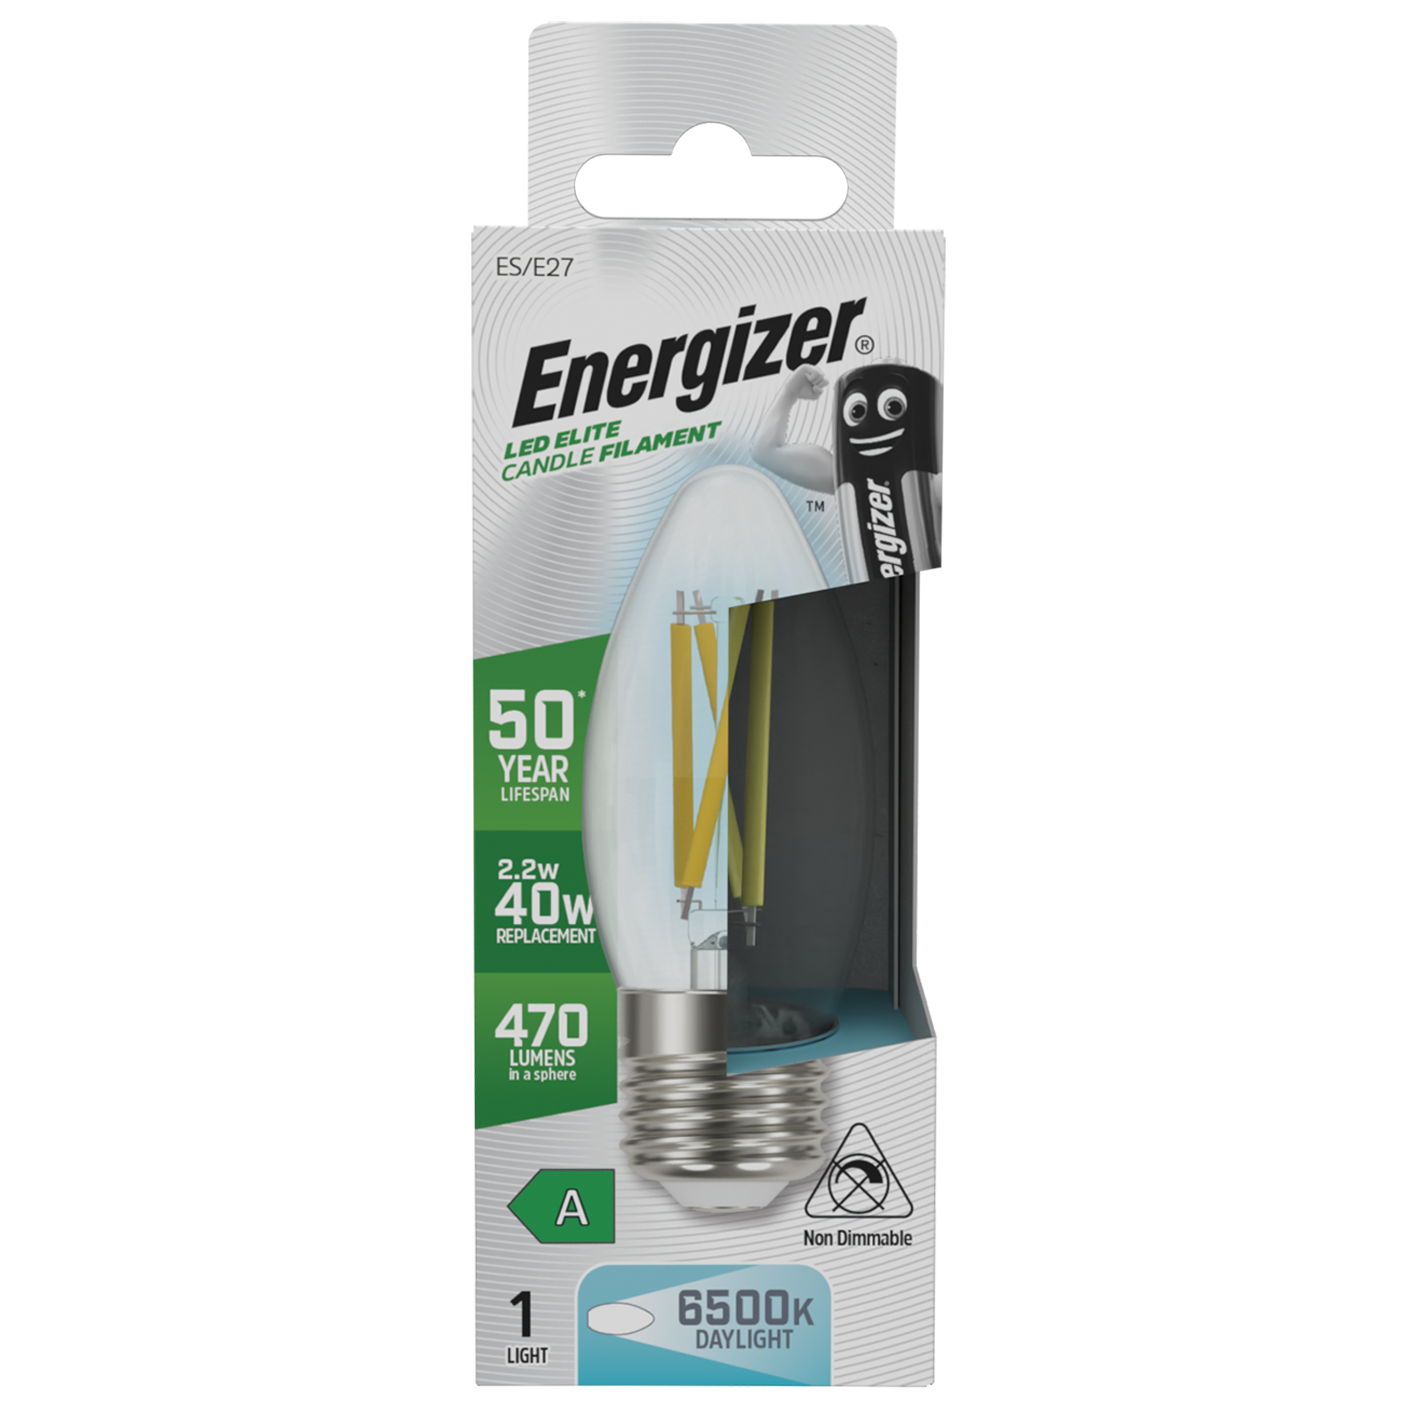 S29637 Energizer A Rated LED Elite Candle E27 Filament 470lm 2.2W 6500K (Daylight) - Box of 1